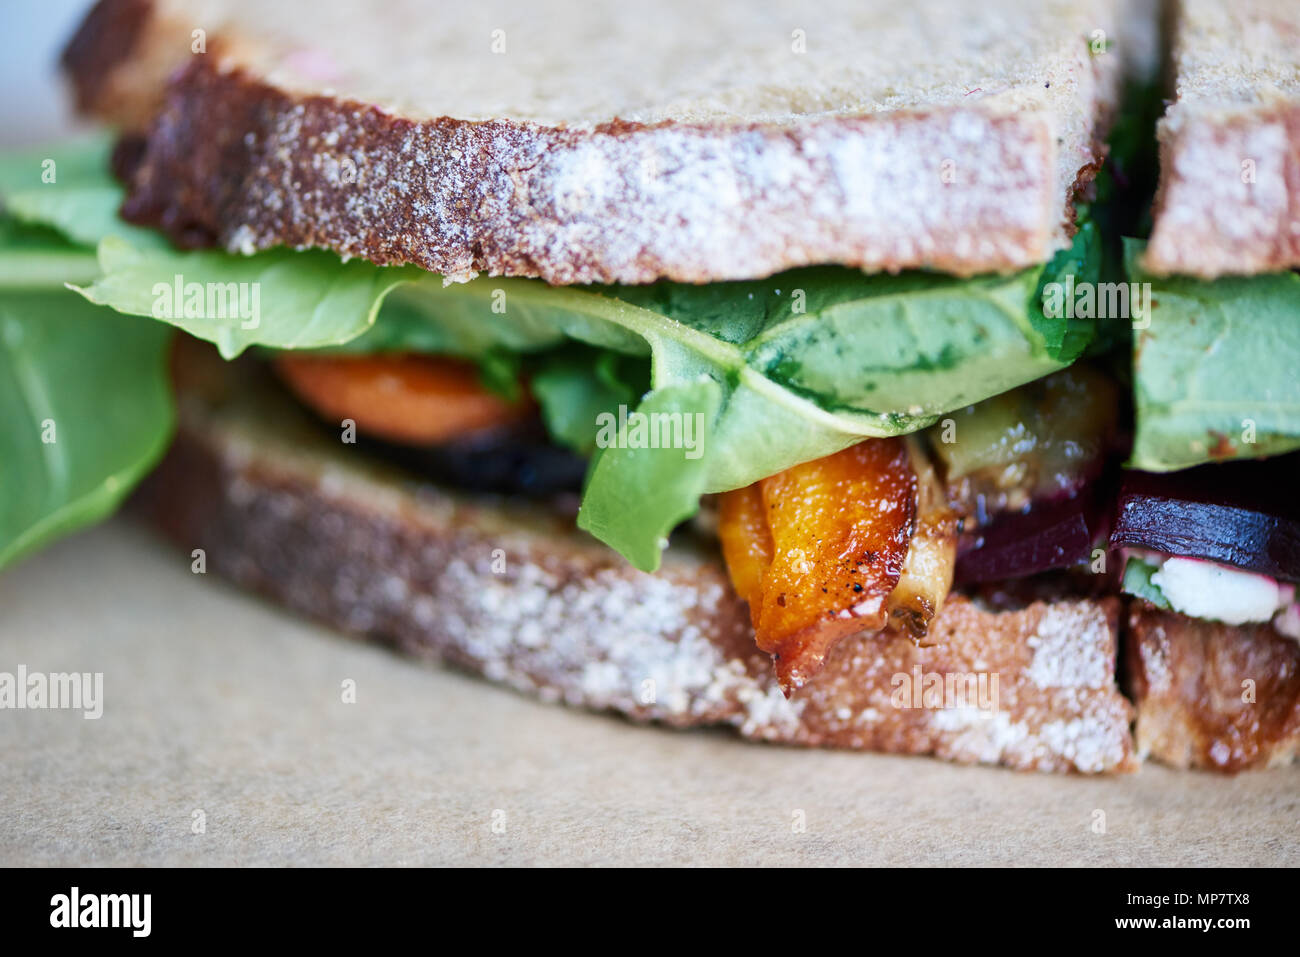 Gourmet mixed vegetable sandwich resting on a wooden table Stock Photo